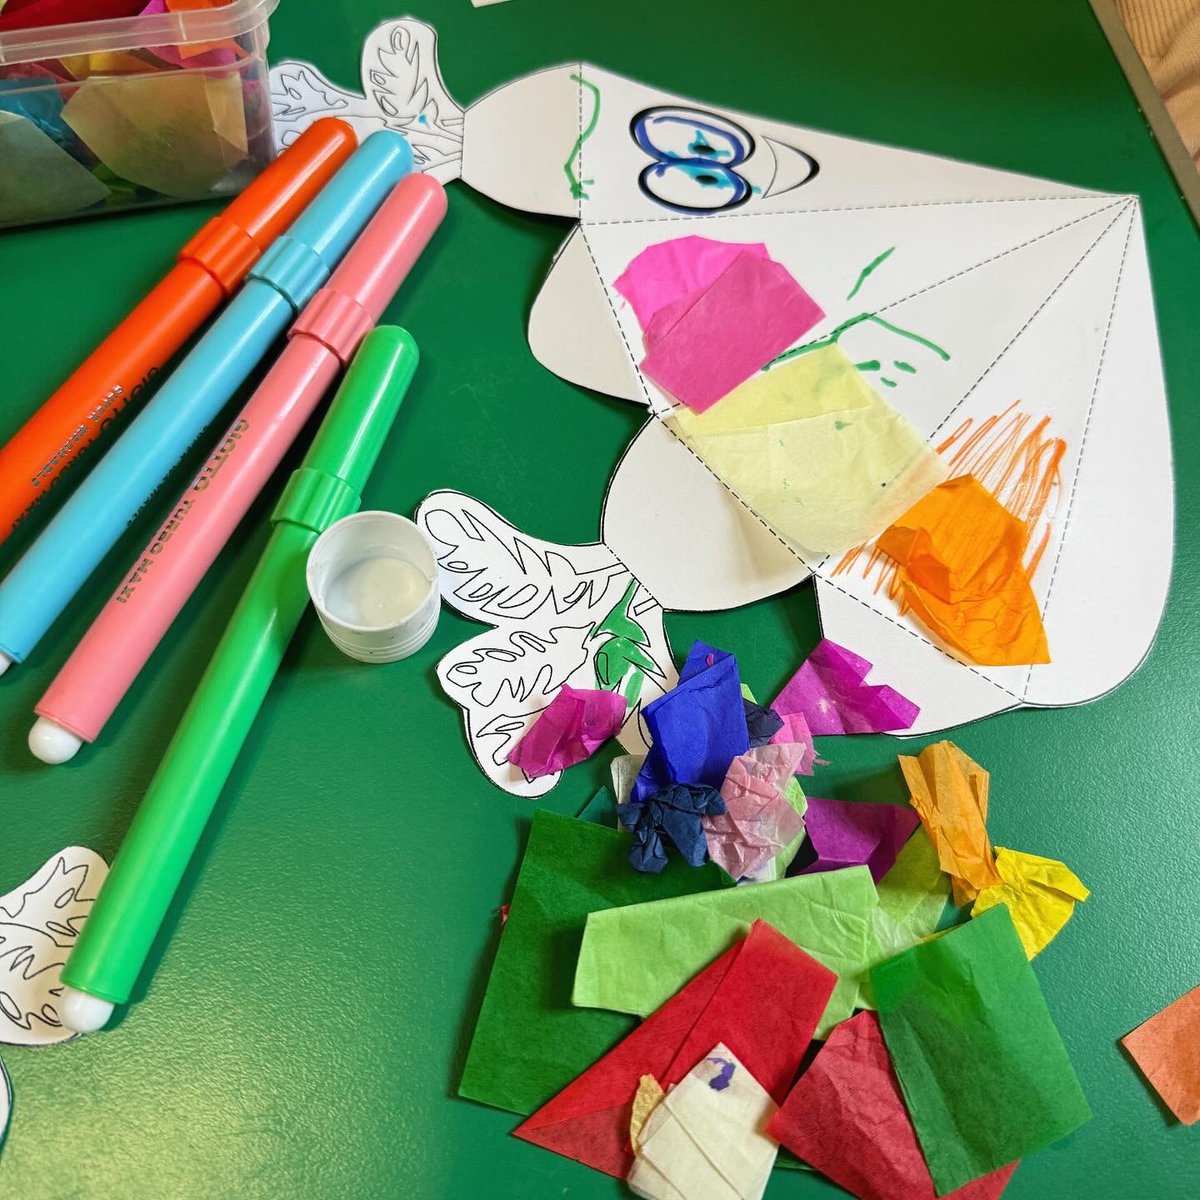 We did lots of sticking at #MessyMorning at #CharltonLibrary on Tuesday! 🎨 We made carrots using different colours and materials to celebrate the start of springtime! 🥕Join us on Tuesdays + Fridays at 10:30-11:30am for more #CraftingFun! 📚 #LoveYourLibrary